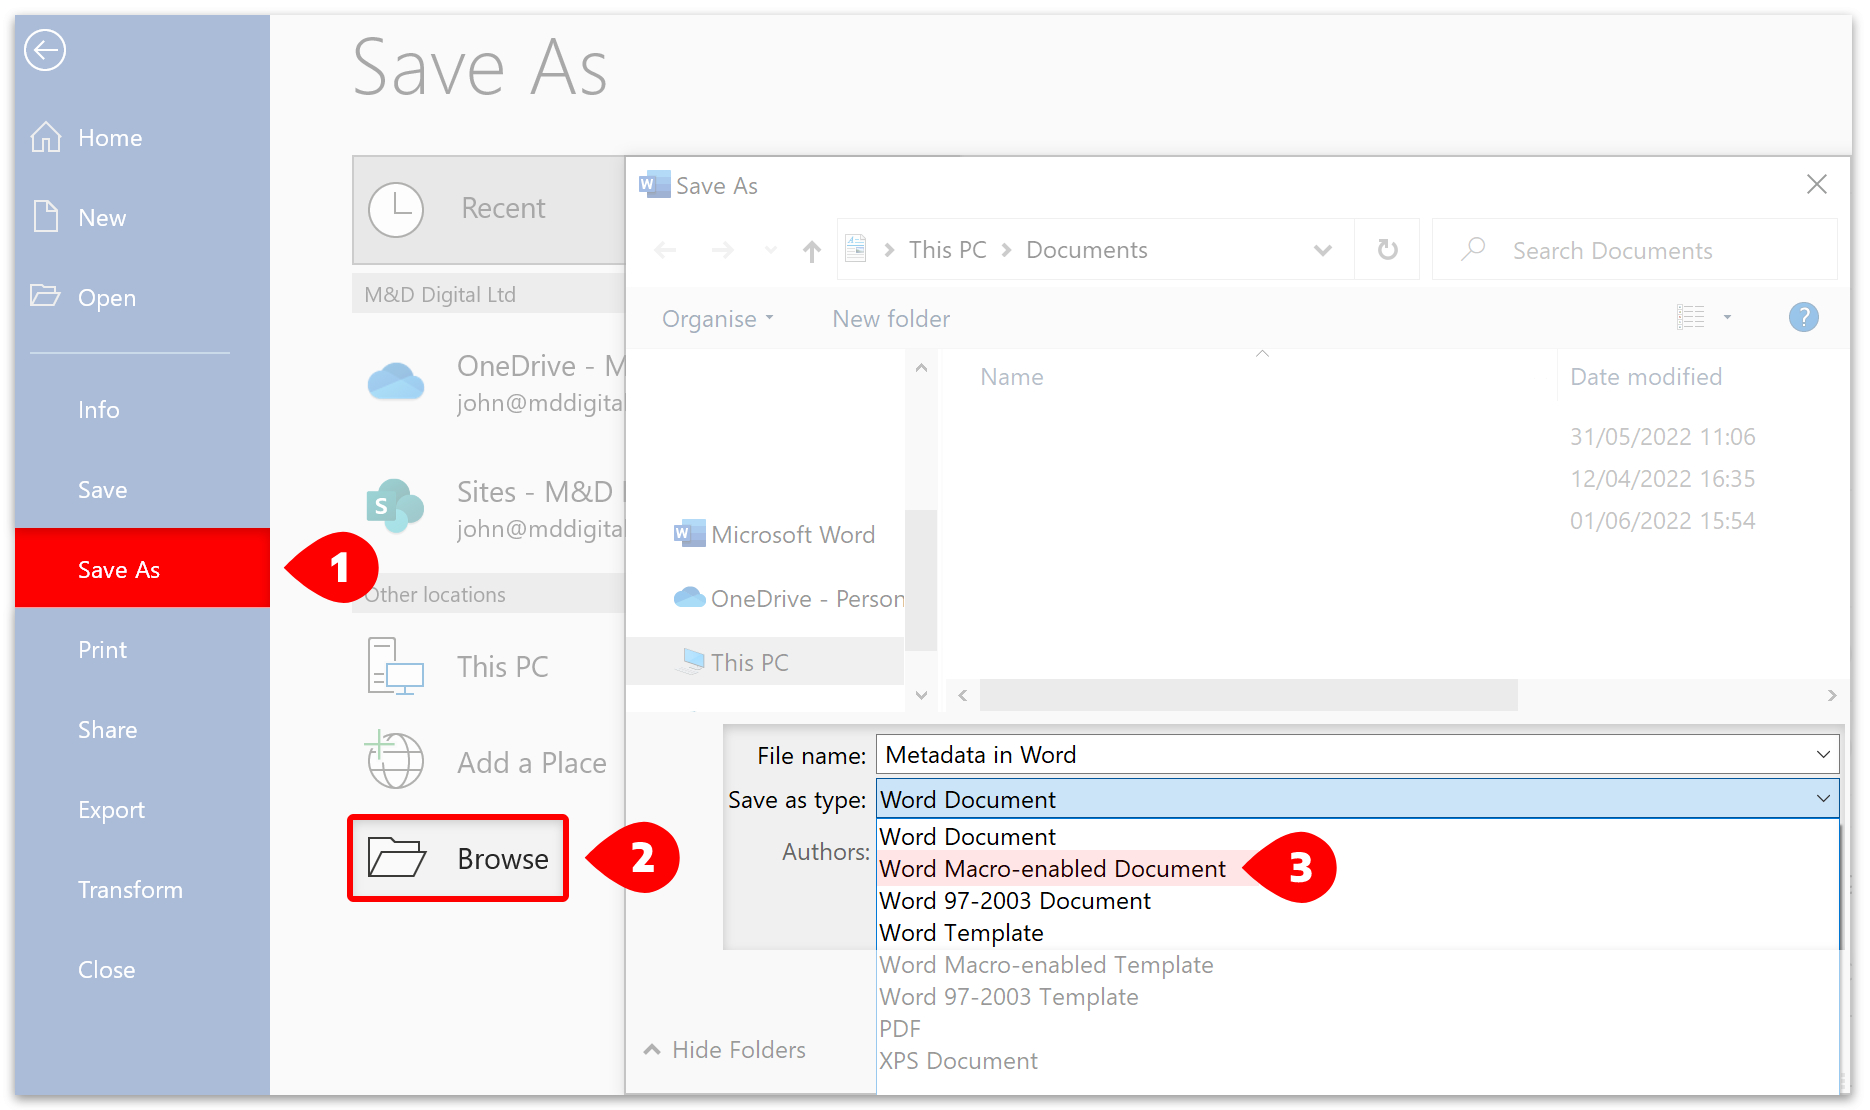 Save As > Browse > Save as type: Word Macro-enabled Document.